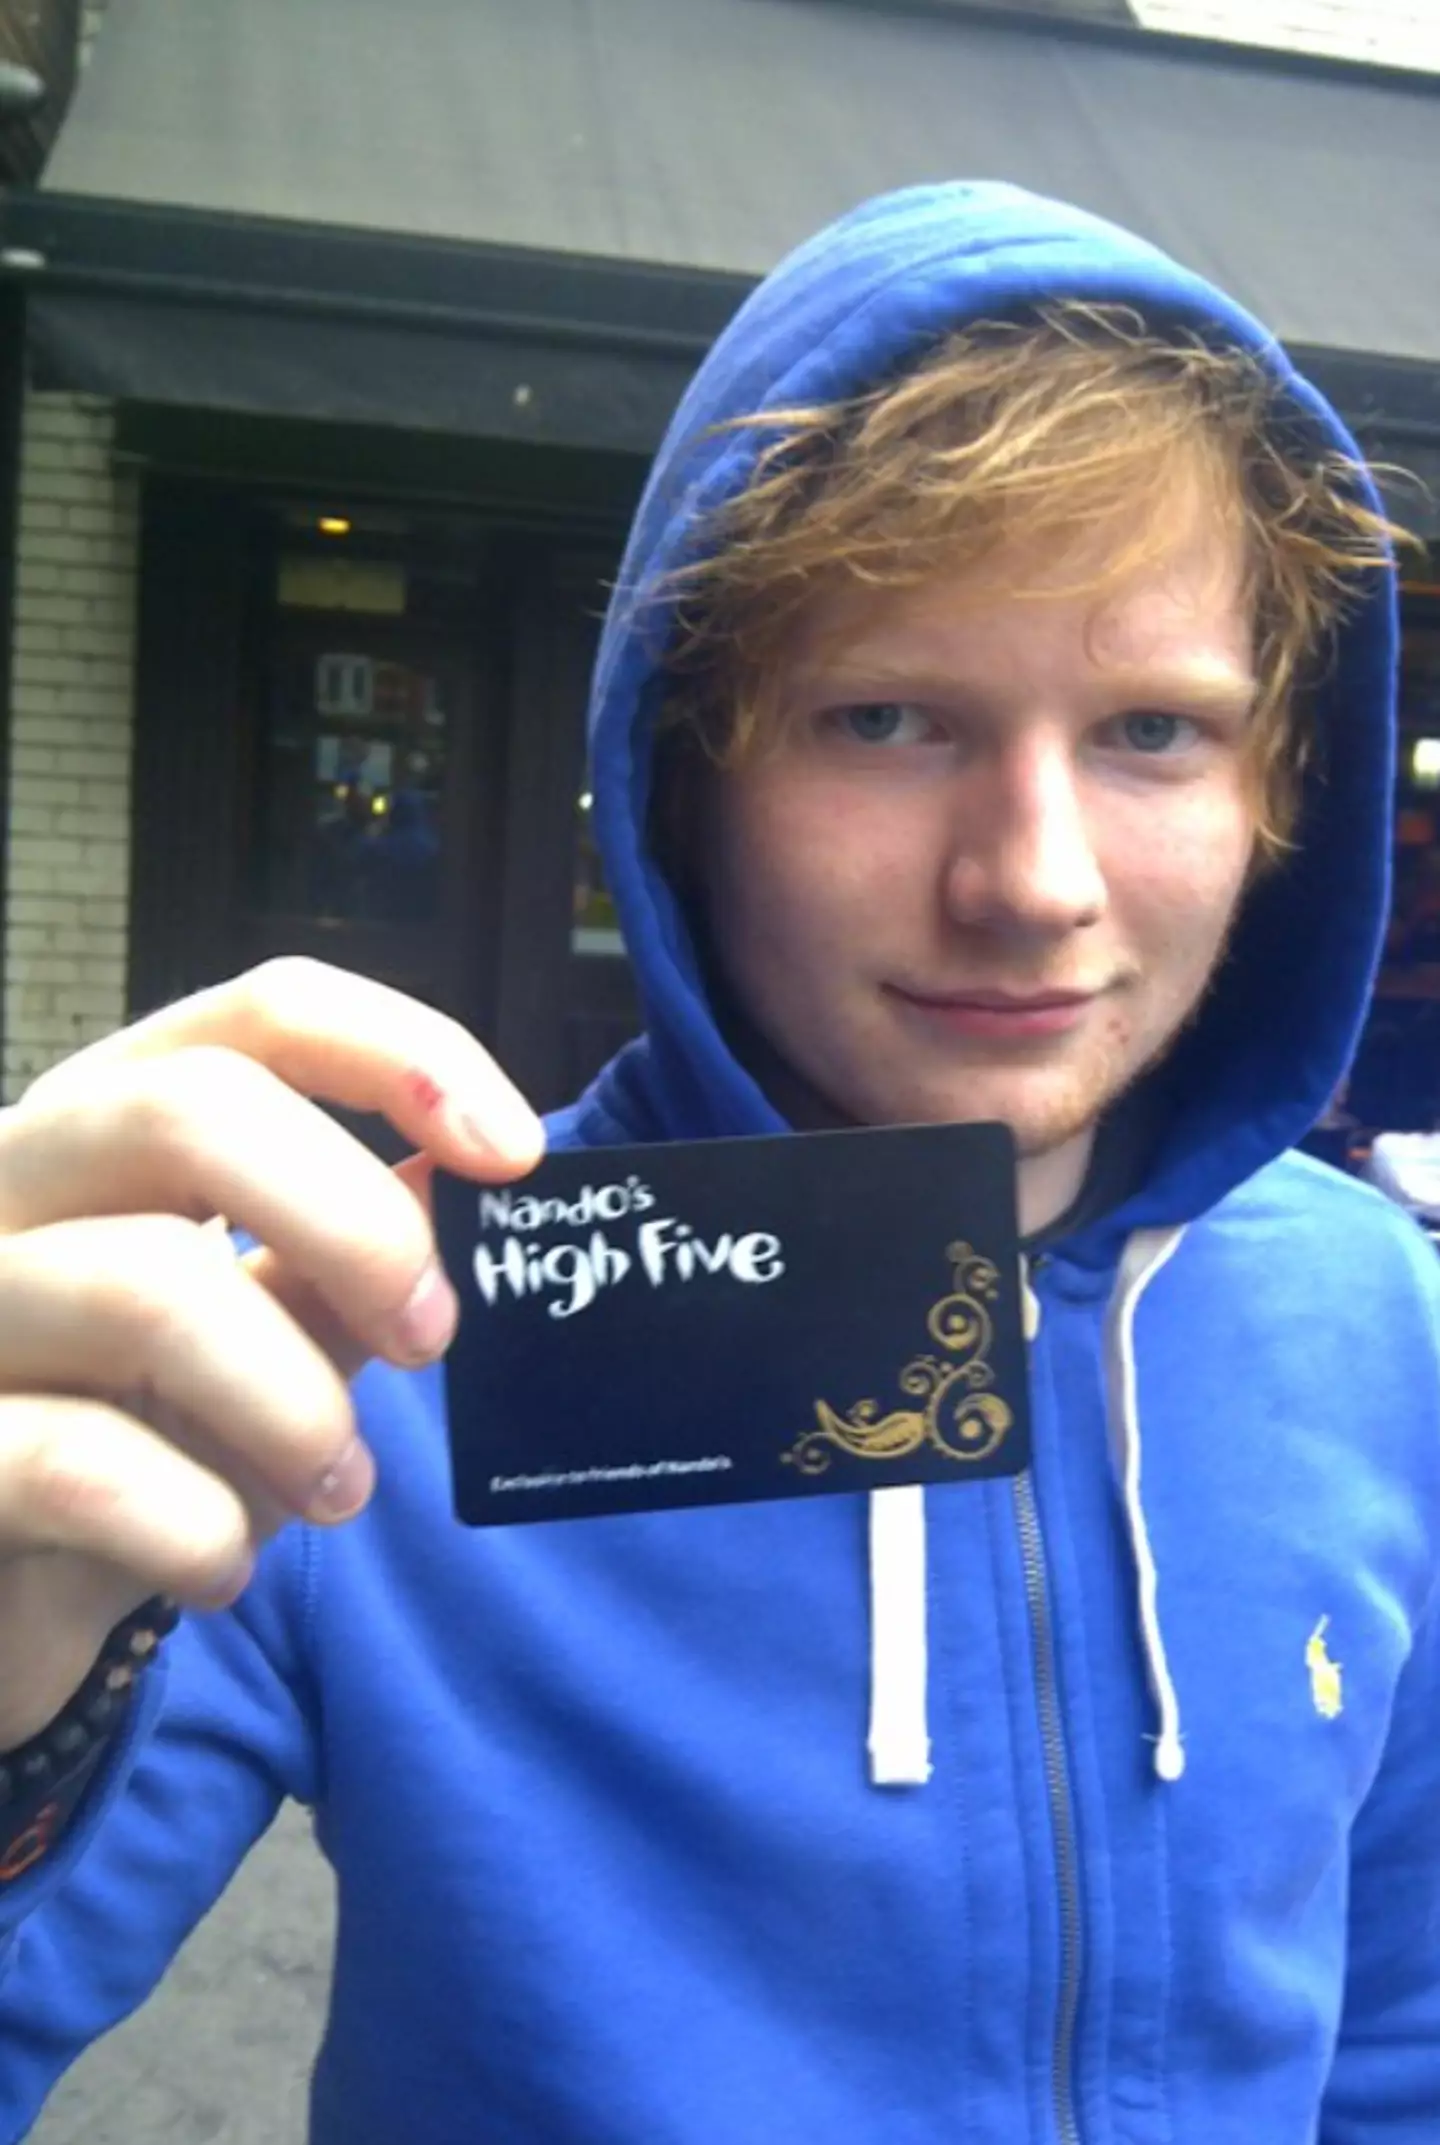 Ed Sheeran was once the holder of a Nando's High Five card.